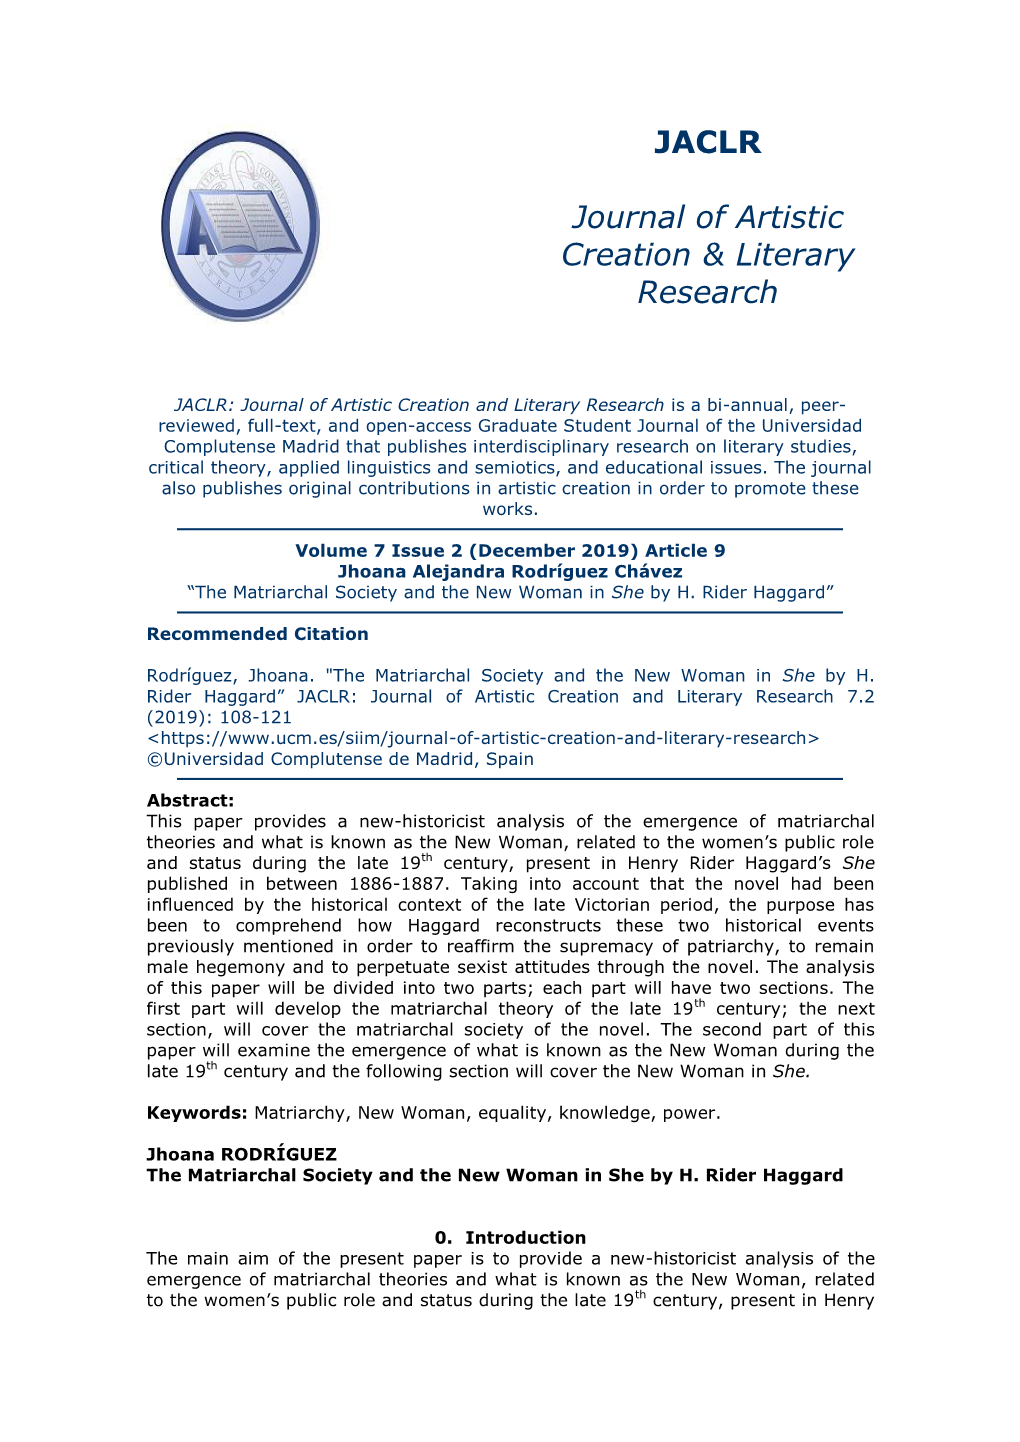 JACLR Journal of Artistic Creation & Literary Research